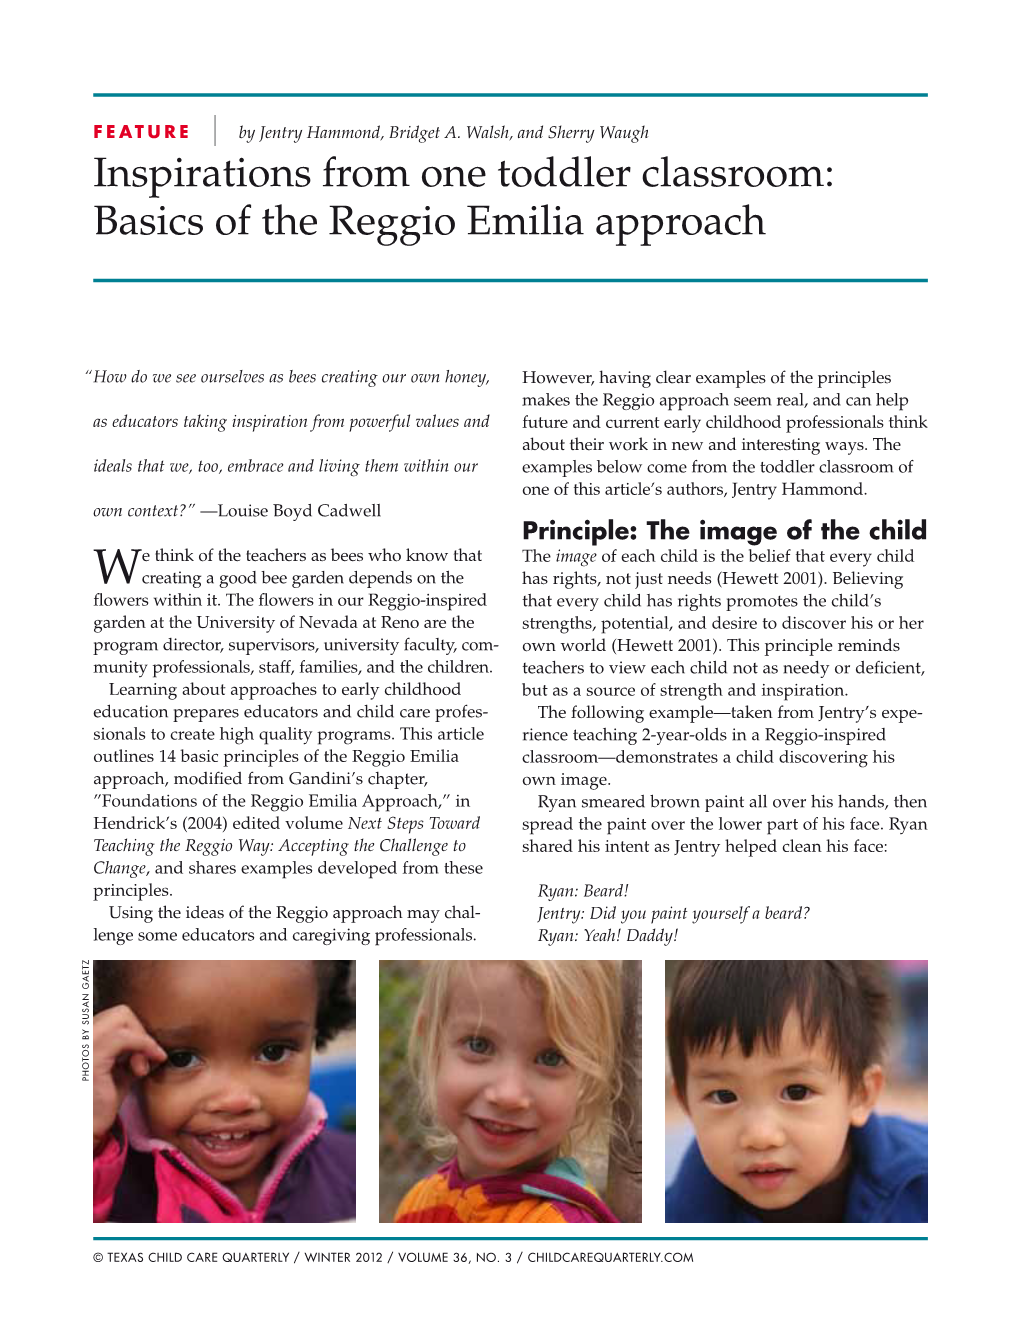 Inspirations from One Toddler Classroom: Basics of the Reggio Emilia Approach